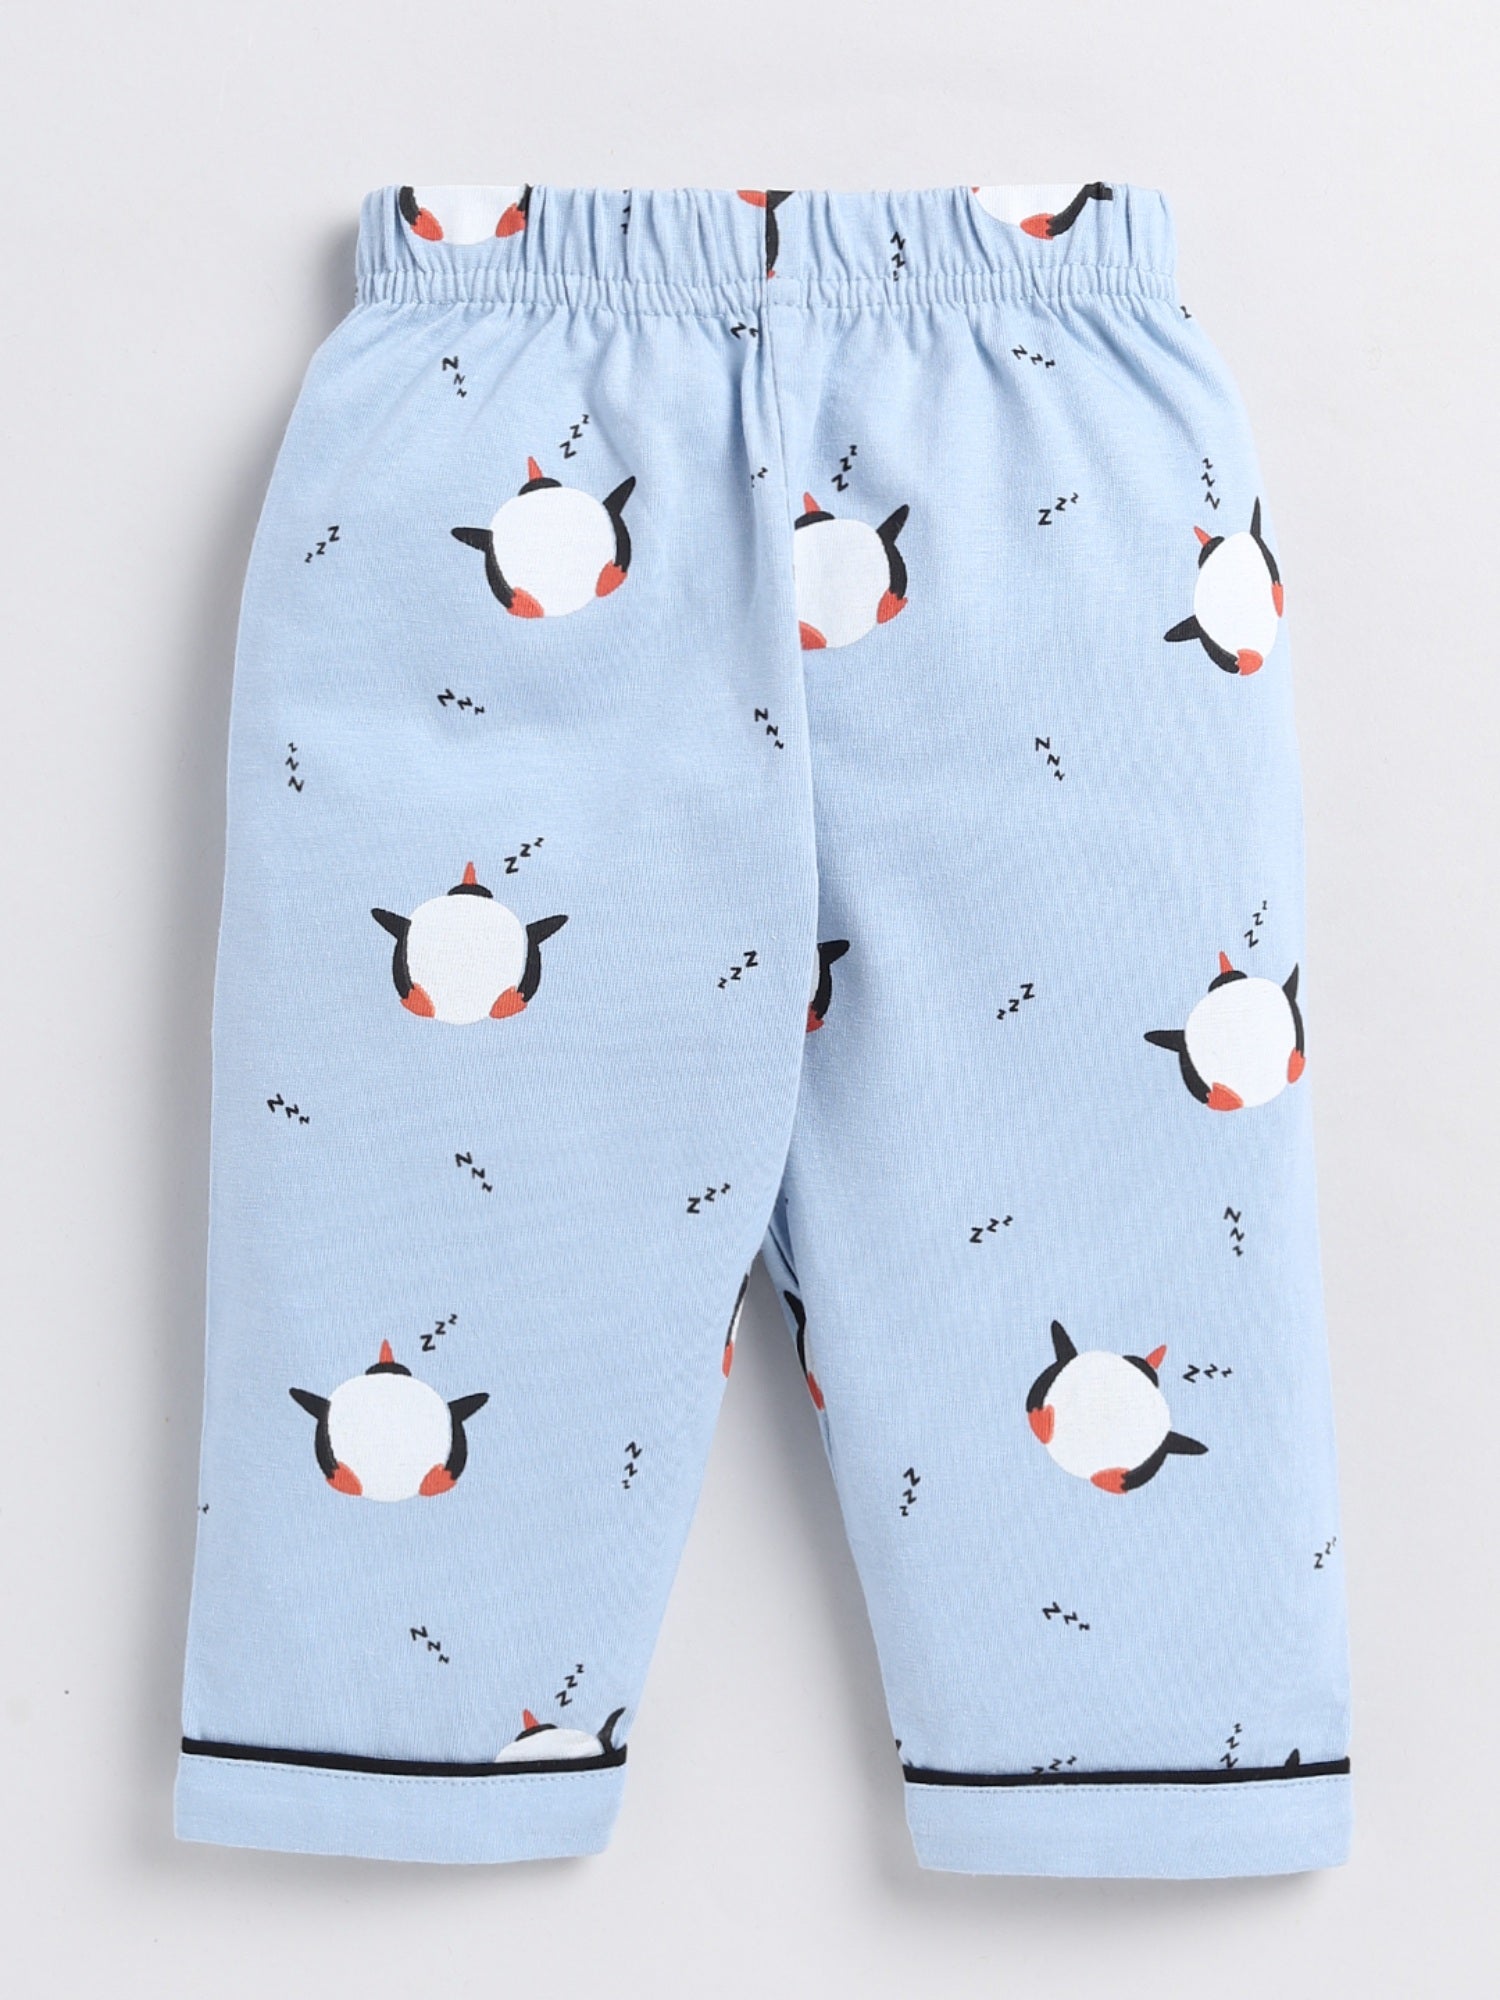 Goodnight Kiss Light Purple Penguin Pajama Pants  Best Price and Reviews   Zulily